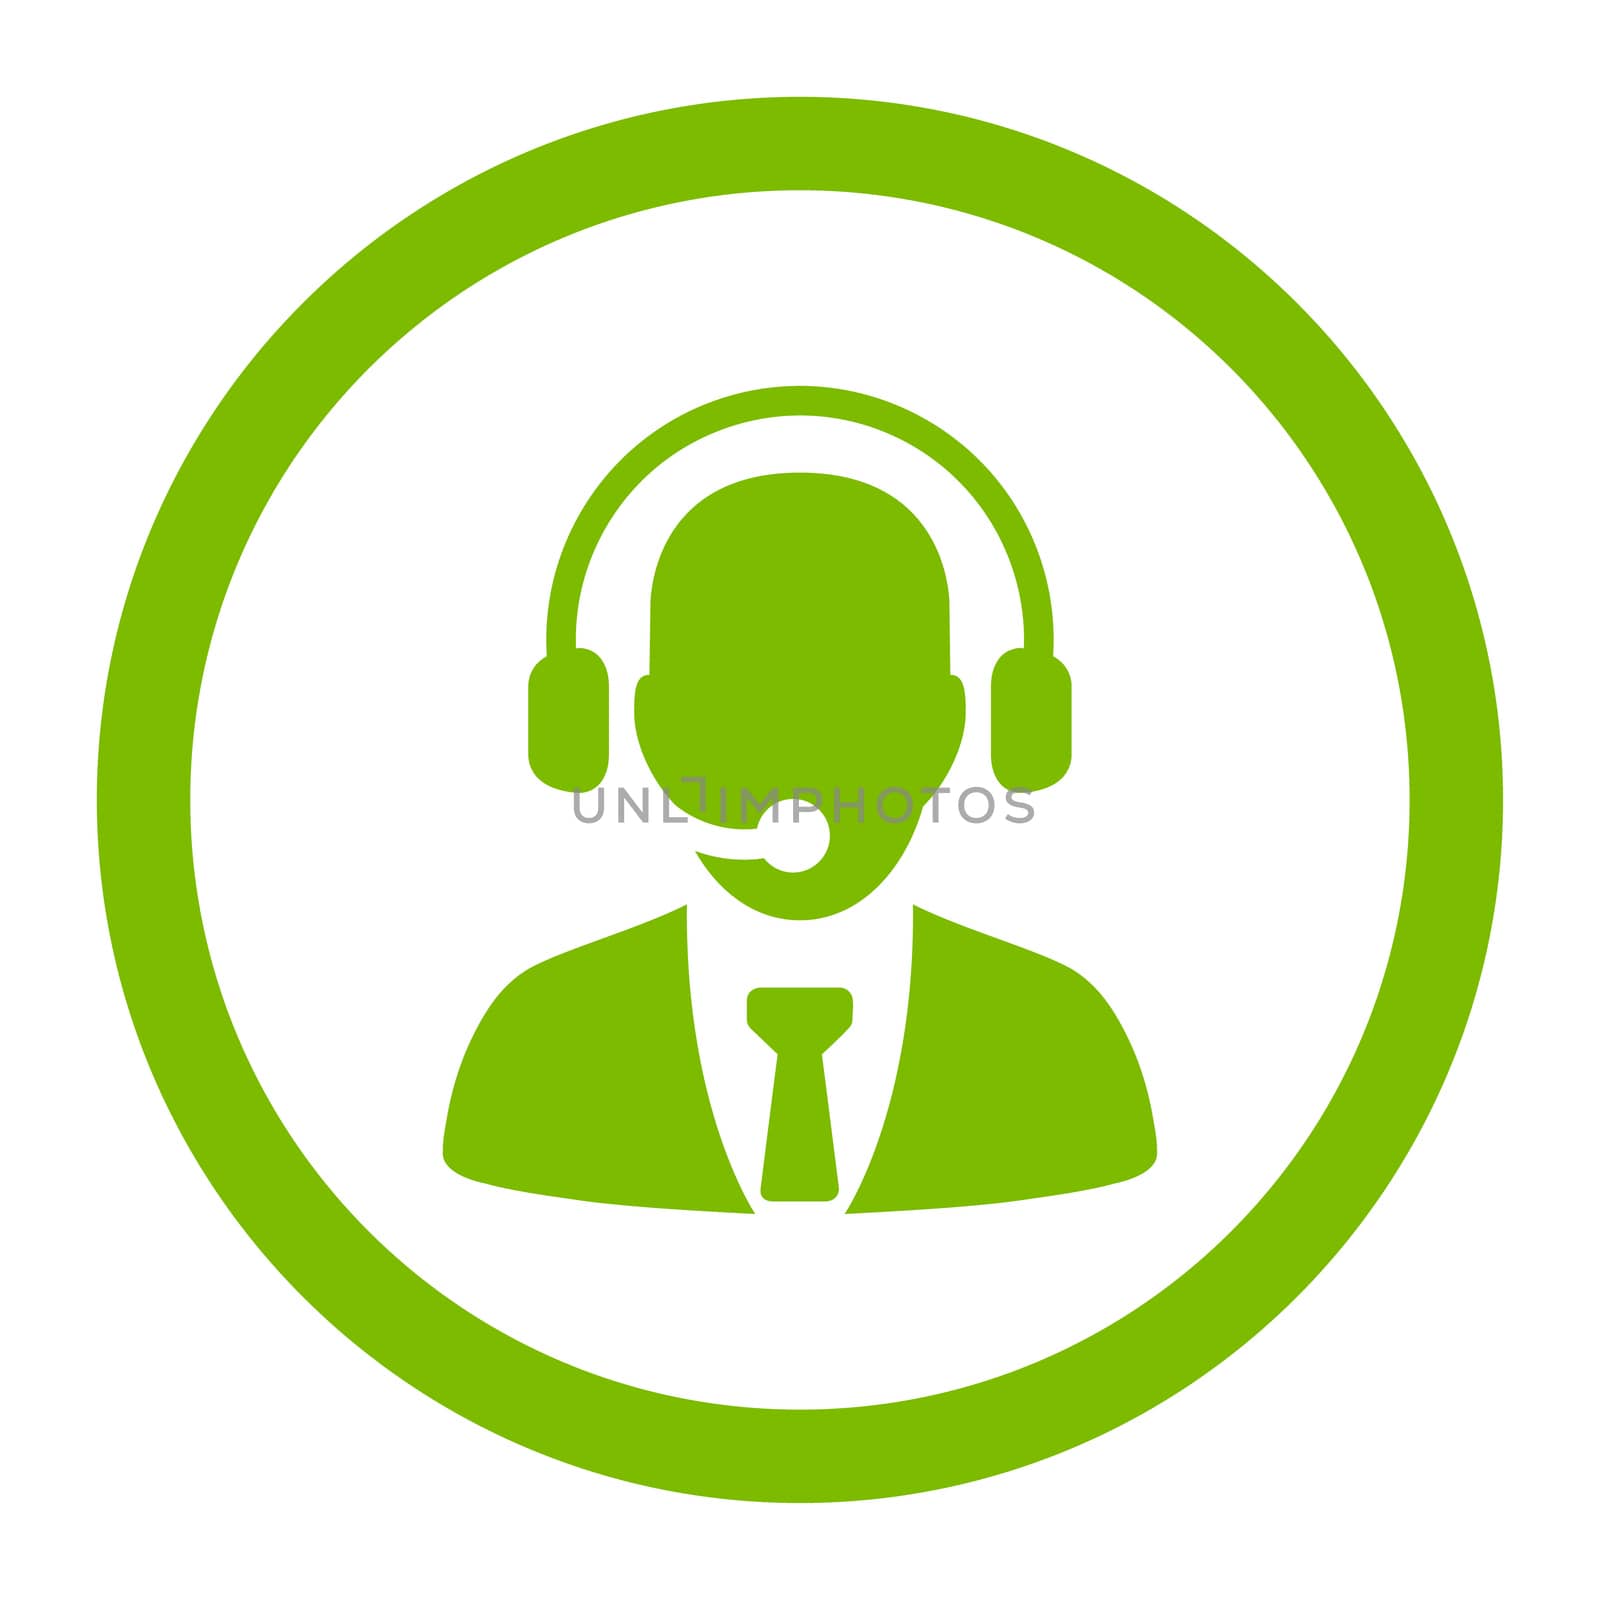 Call center glyph icon. This rounded flat symbol is drawn with eco green color on a white background.